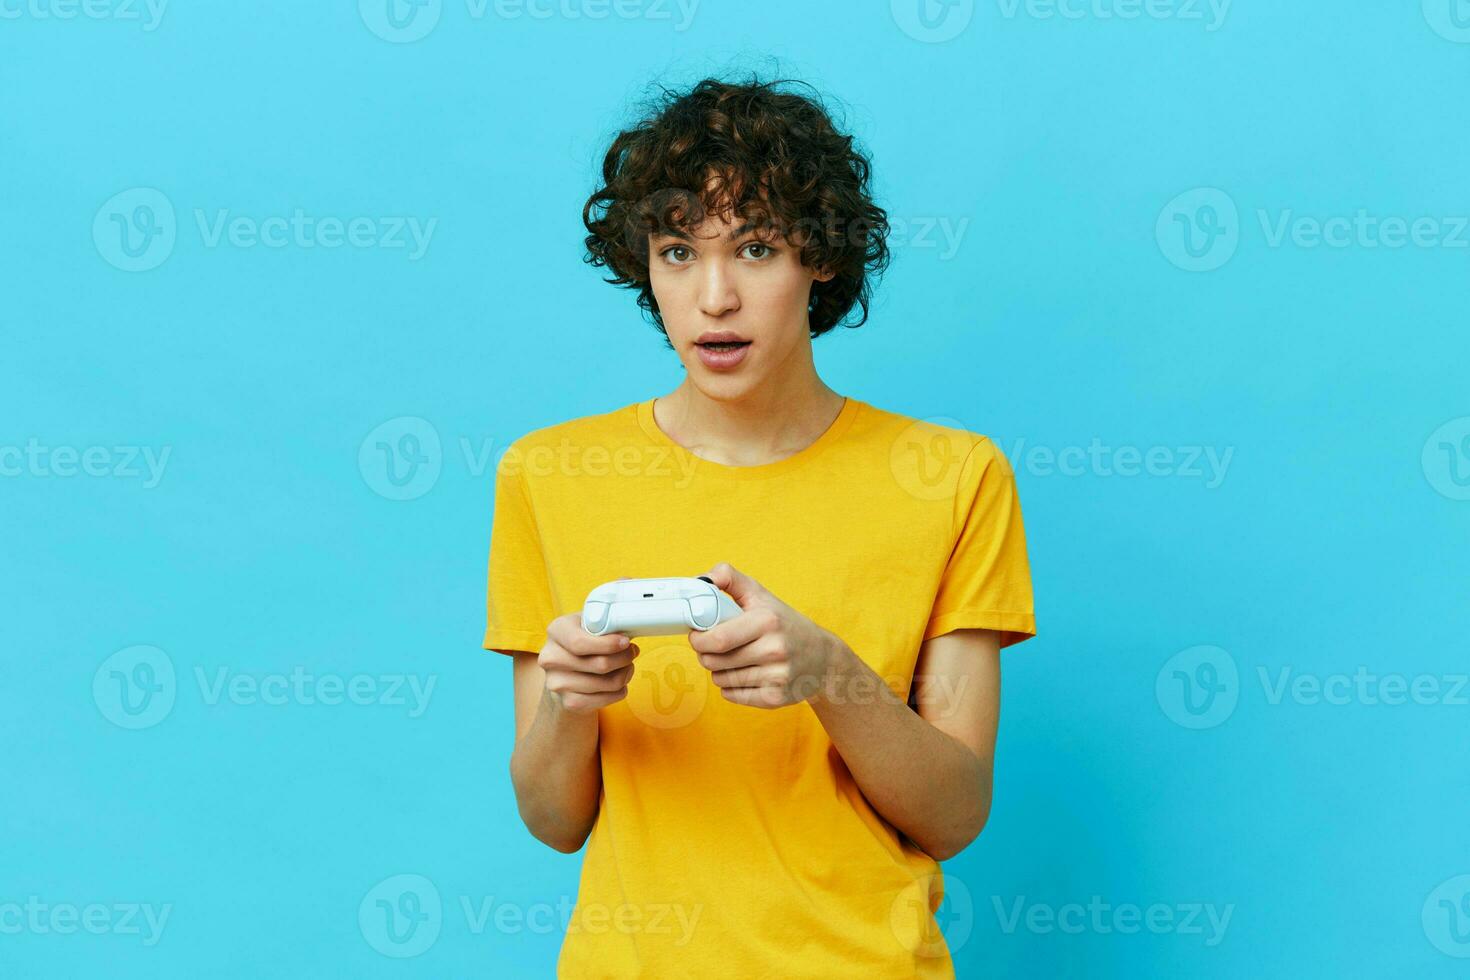 guy yellow T-shirt with joystick video games isolated backgrounds photo